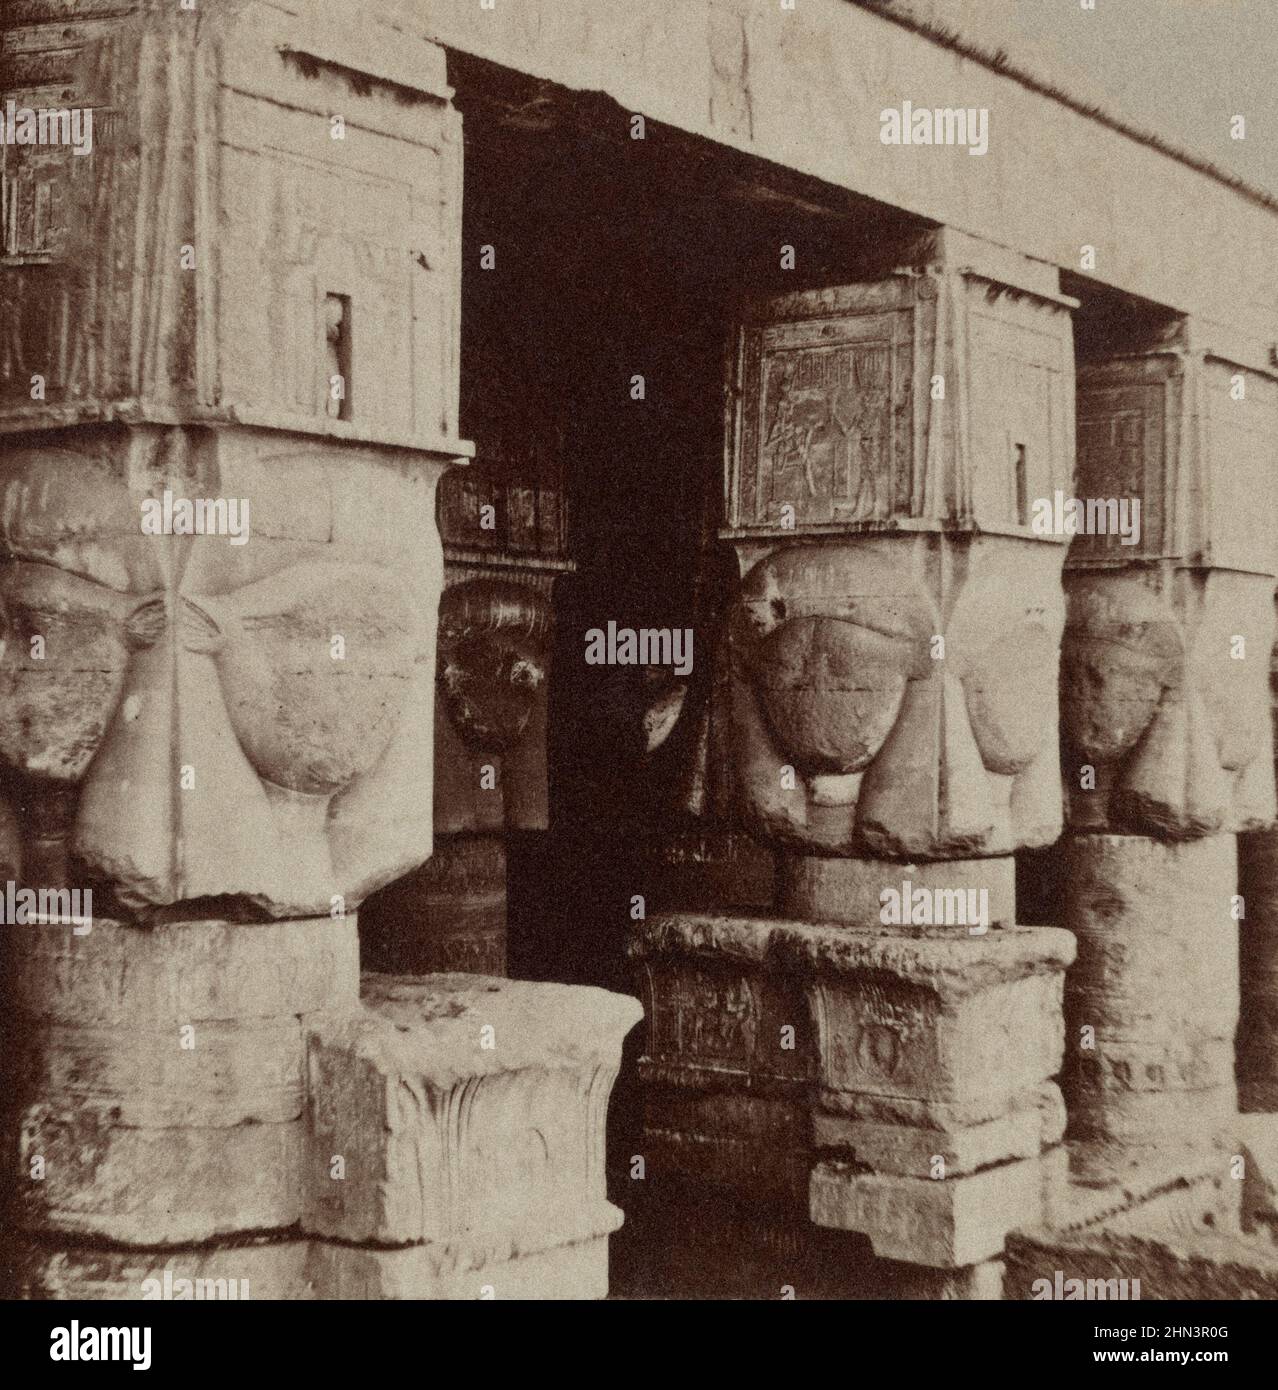 Vintage archival photo of Portico of the temple of Dendera. Egypt, Nubia, and Ethiopia by Francis Frith. 1860 Stock Photo